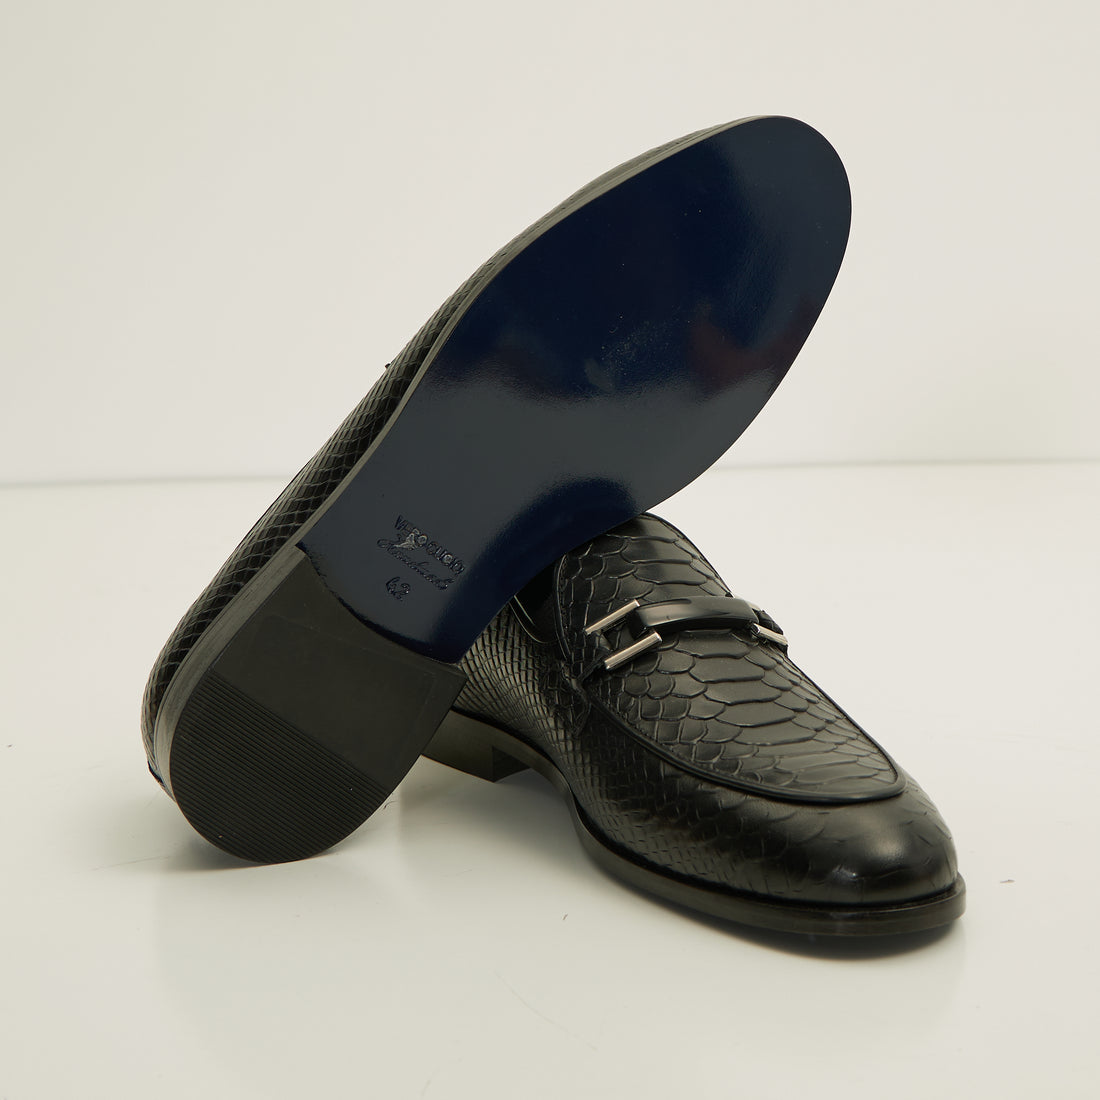 The Croc Classic Leather Loafer - Black